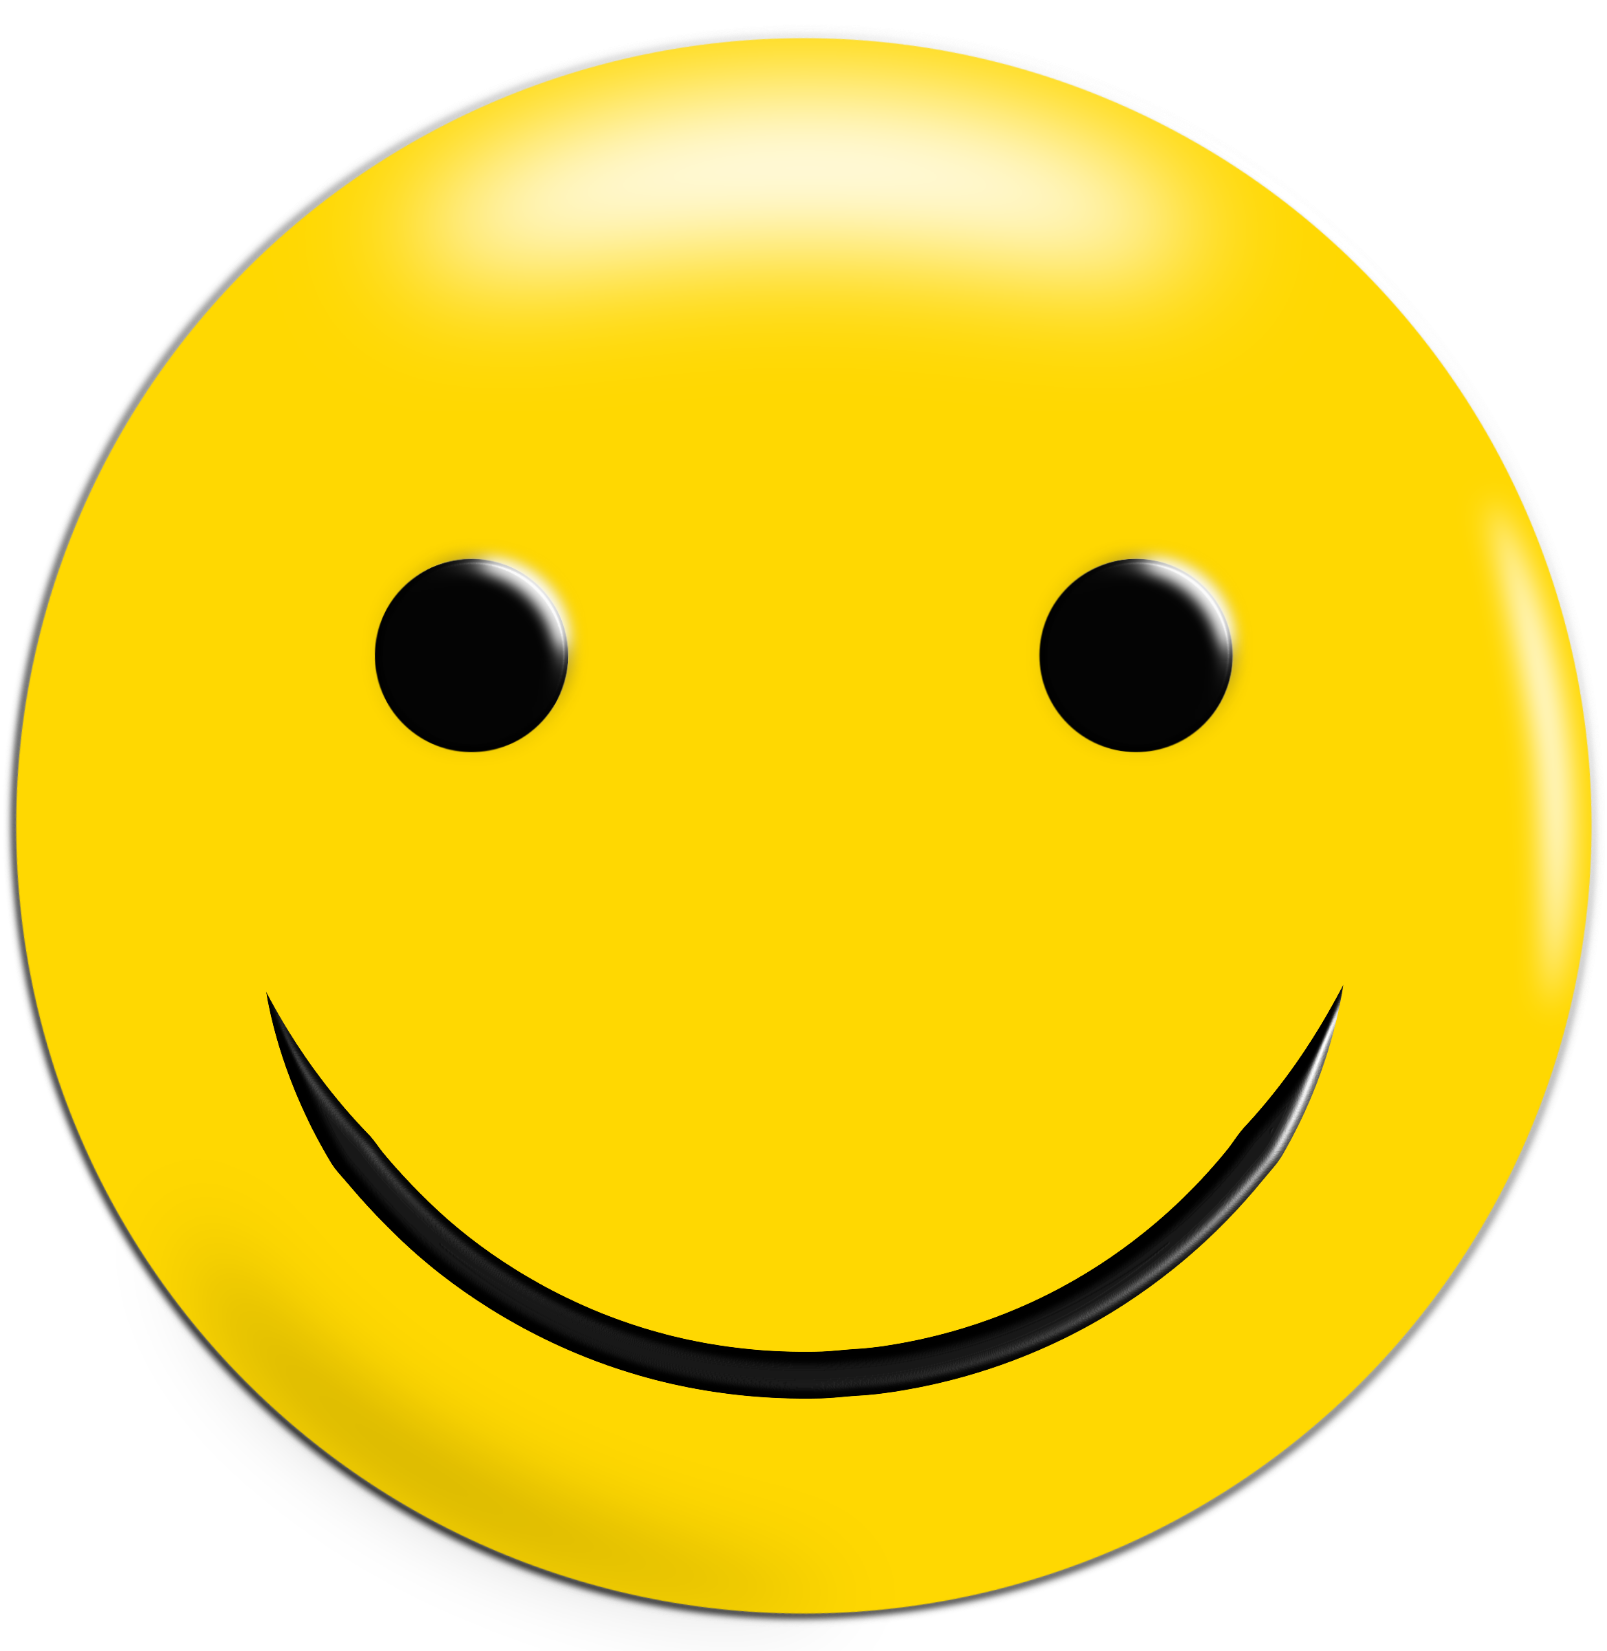 smiley-face-png-from-pngfre-33